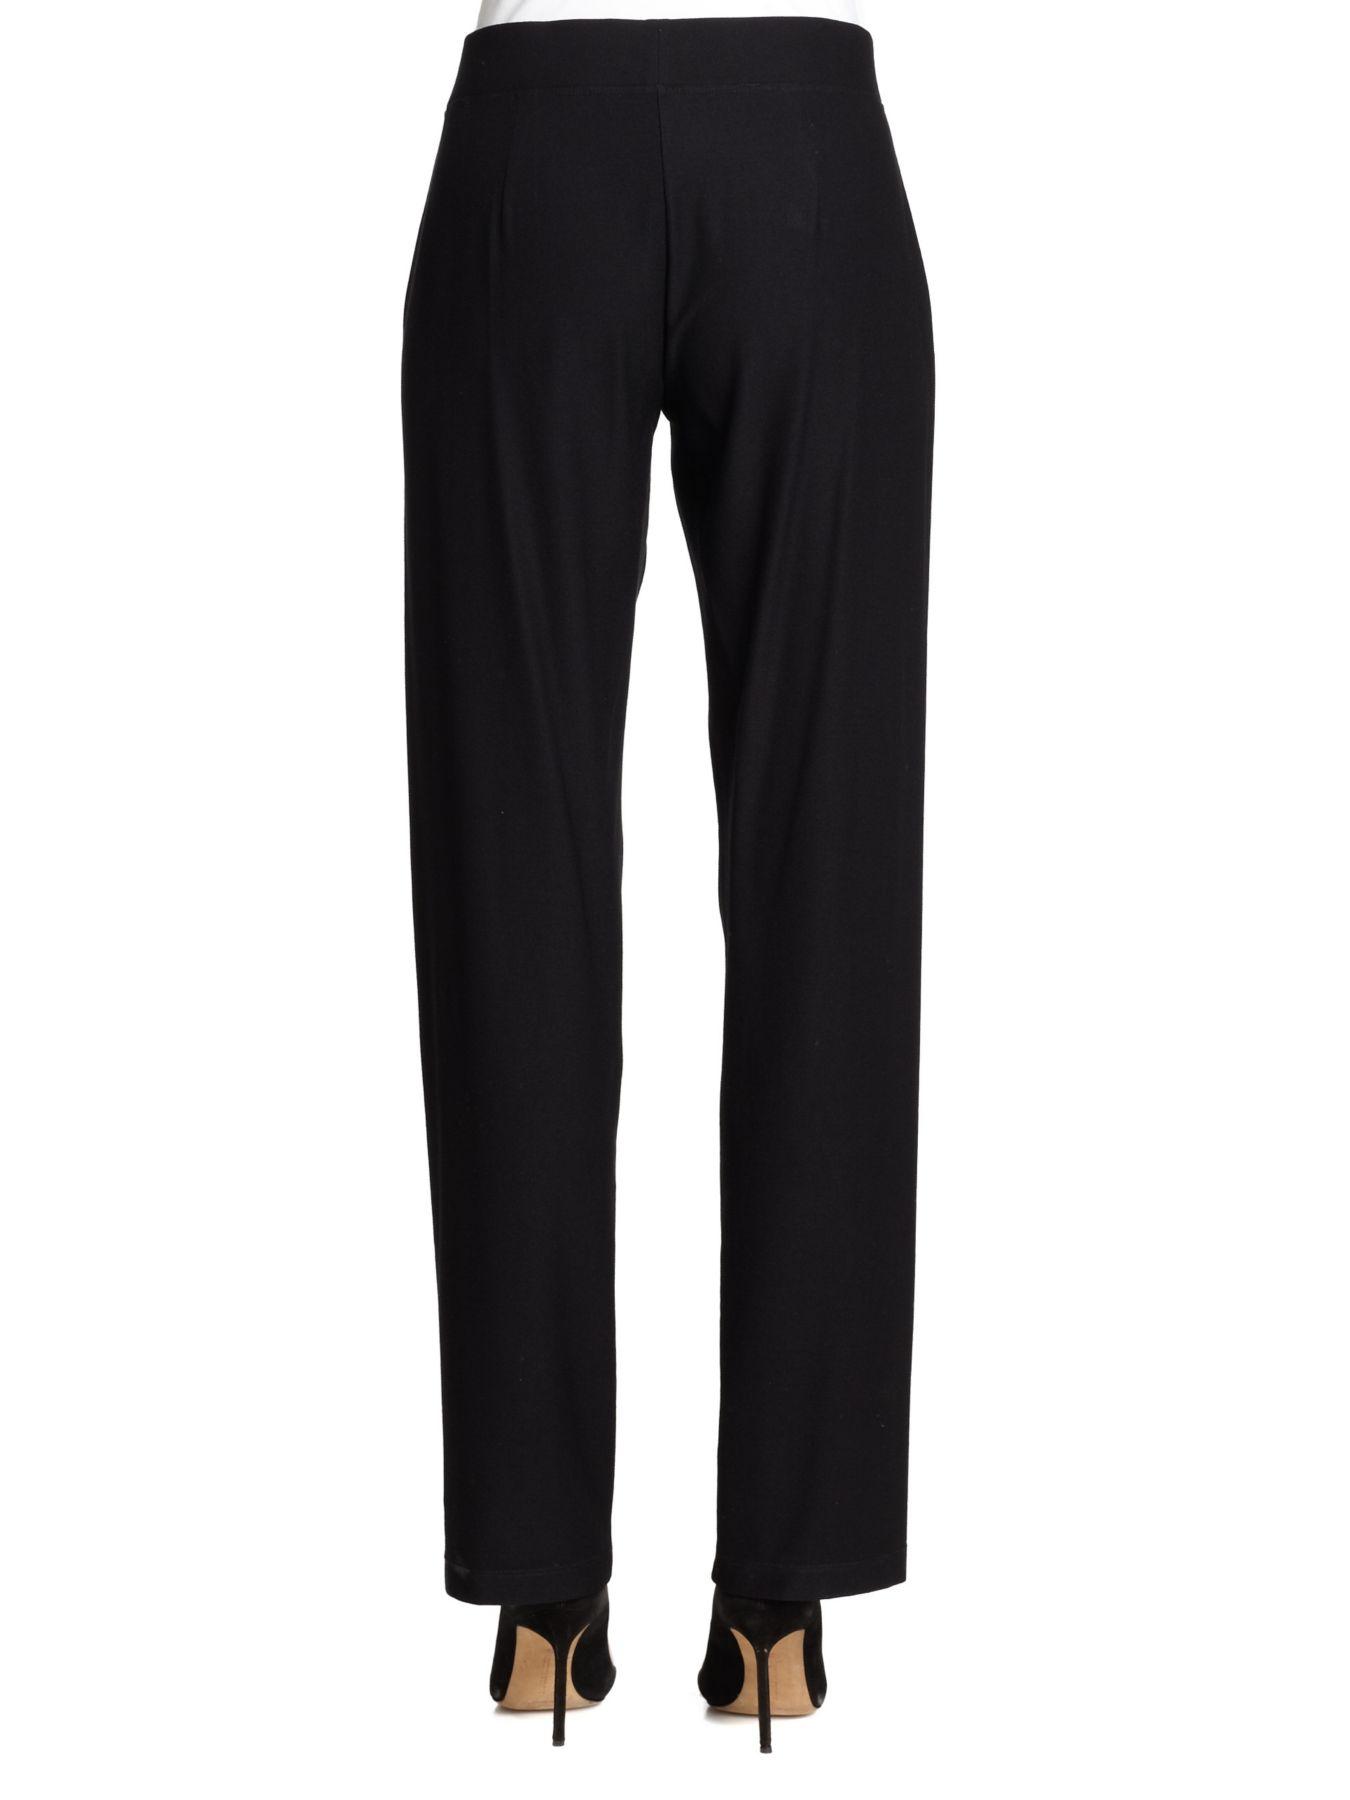 Eileen Fisher Synthetic Stretch Straight-leg Pants in Black - Lyst